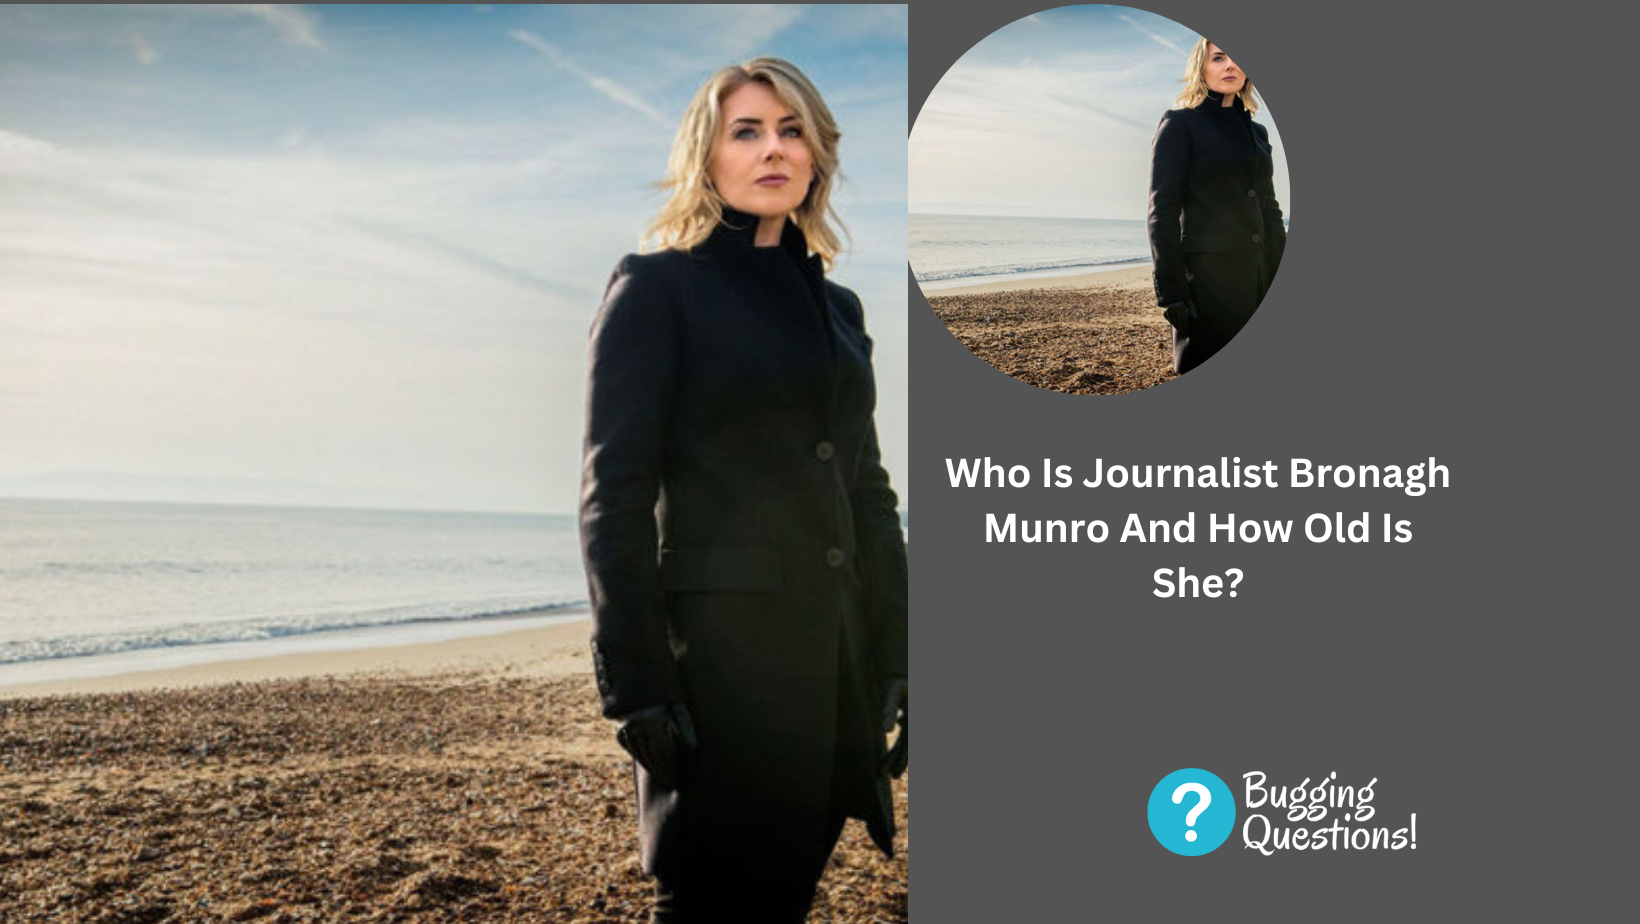 Who Is Journalist Bronagh Munro And How Old Is She?